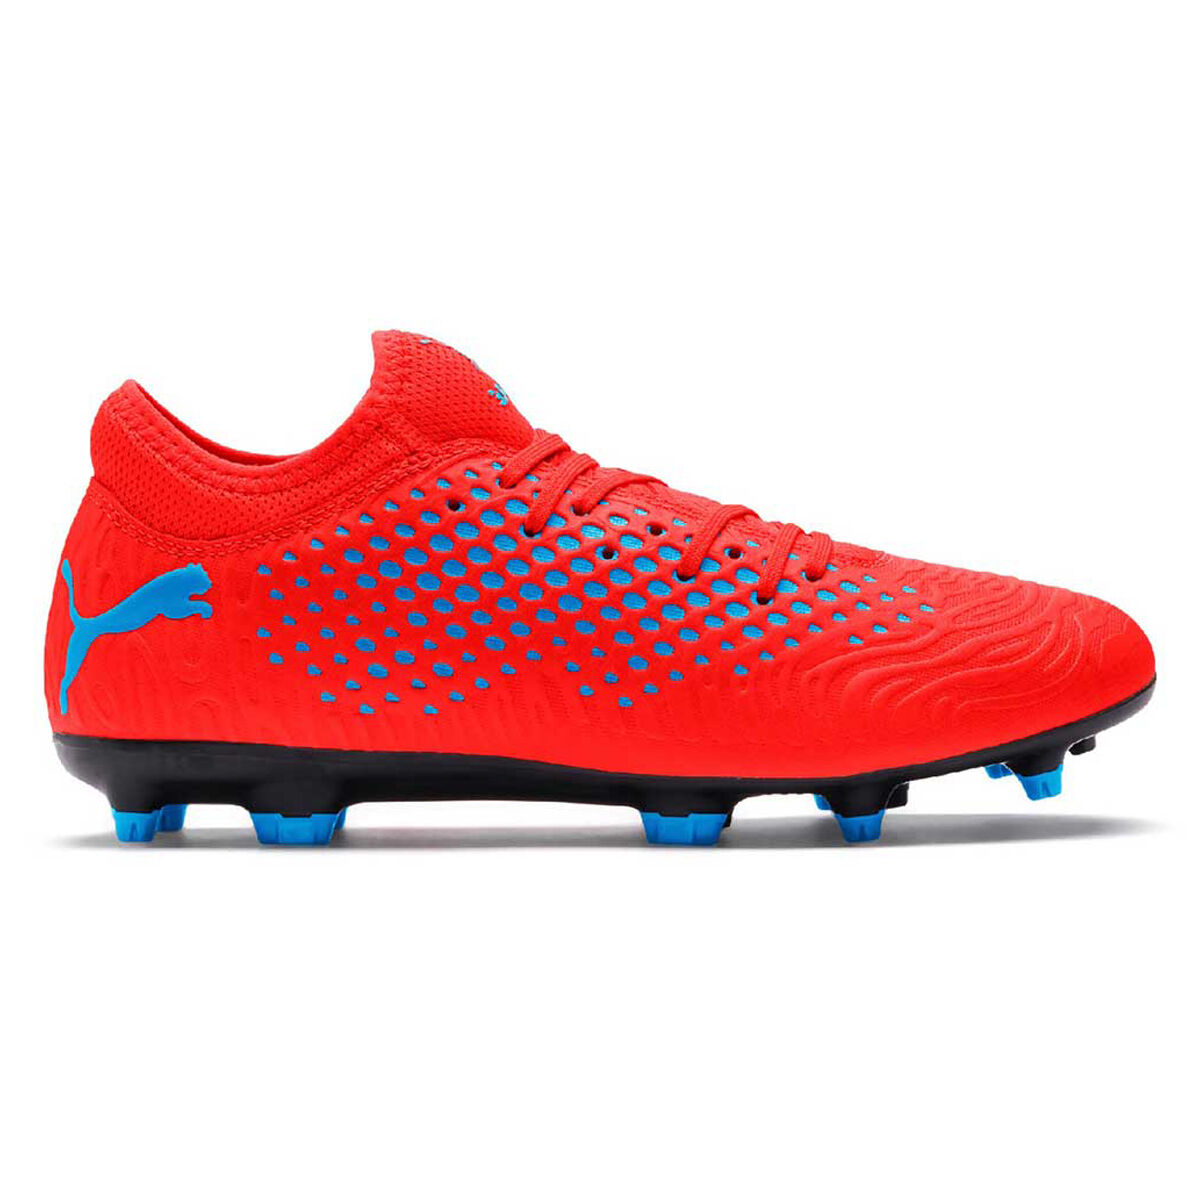 are puma football boots true to size